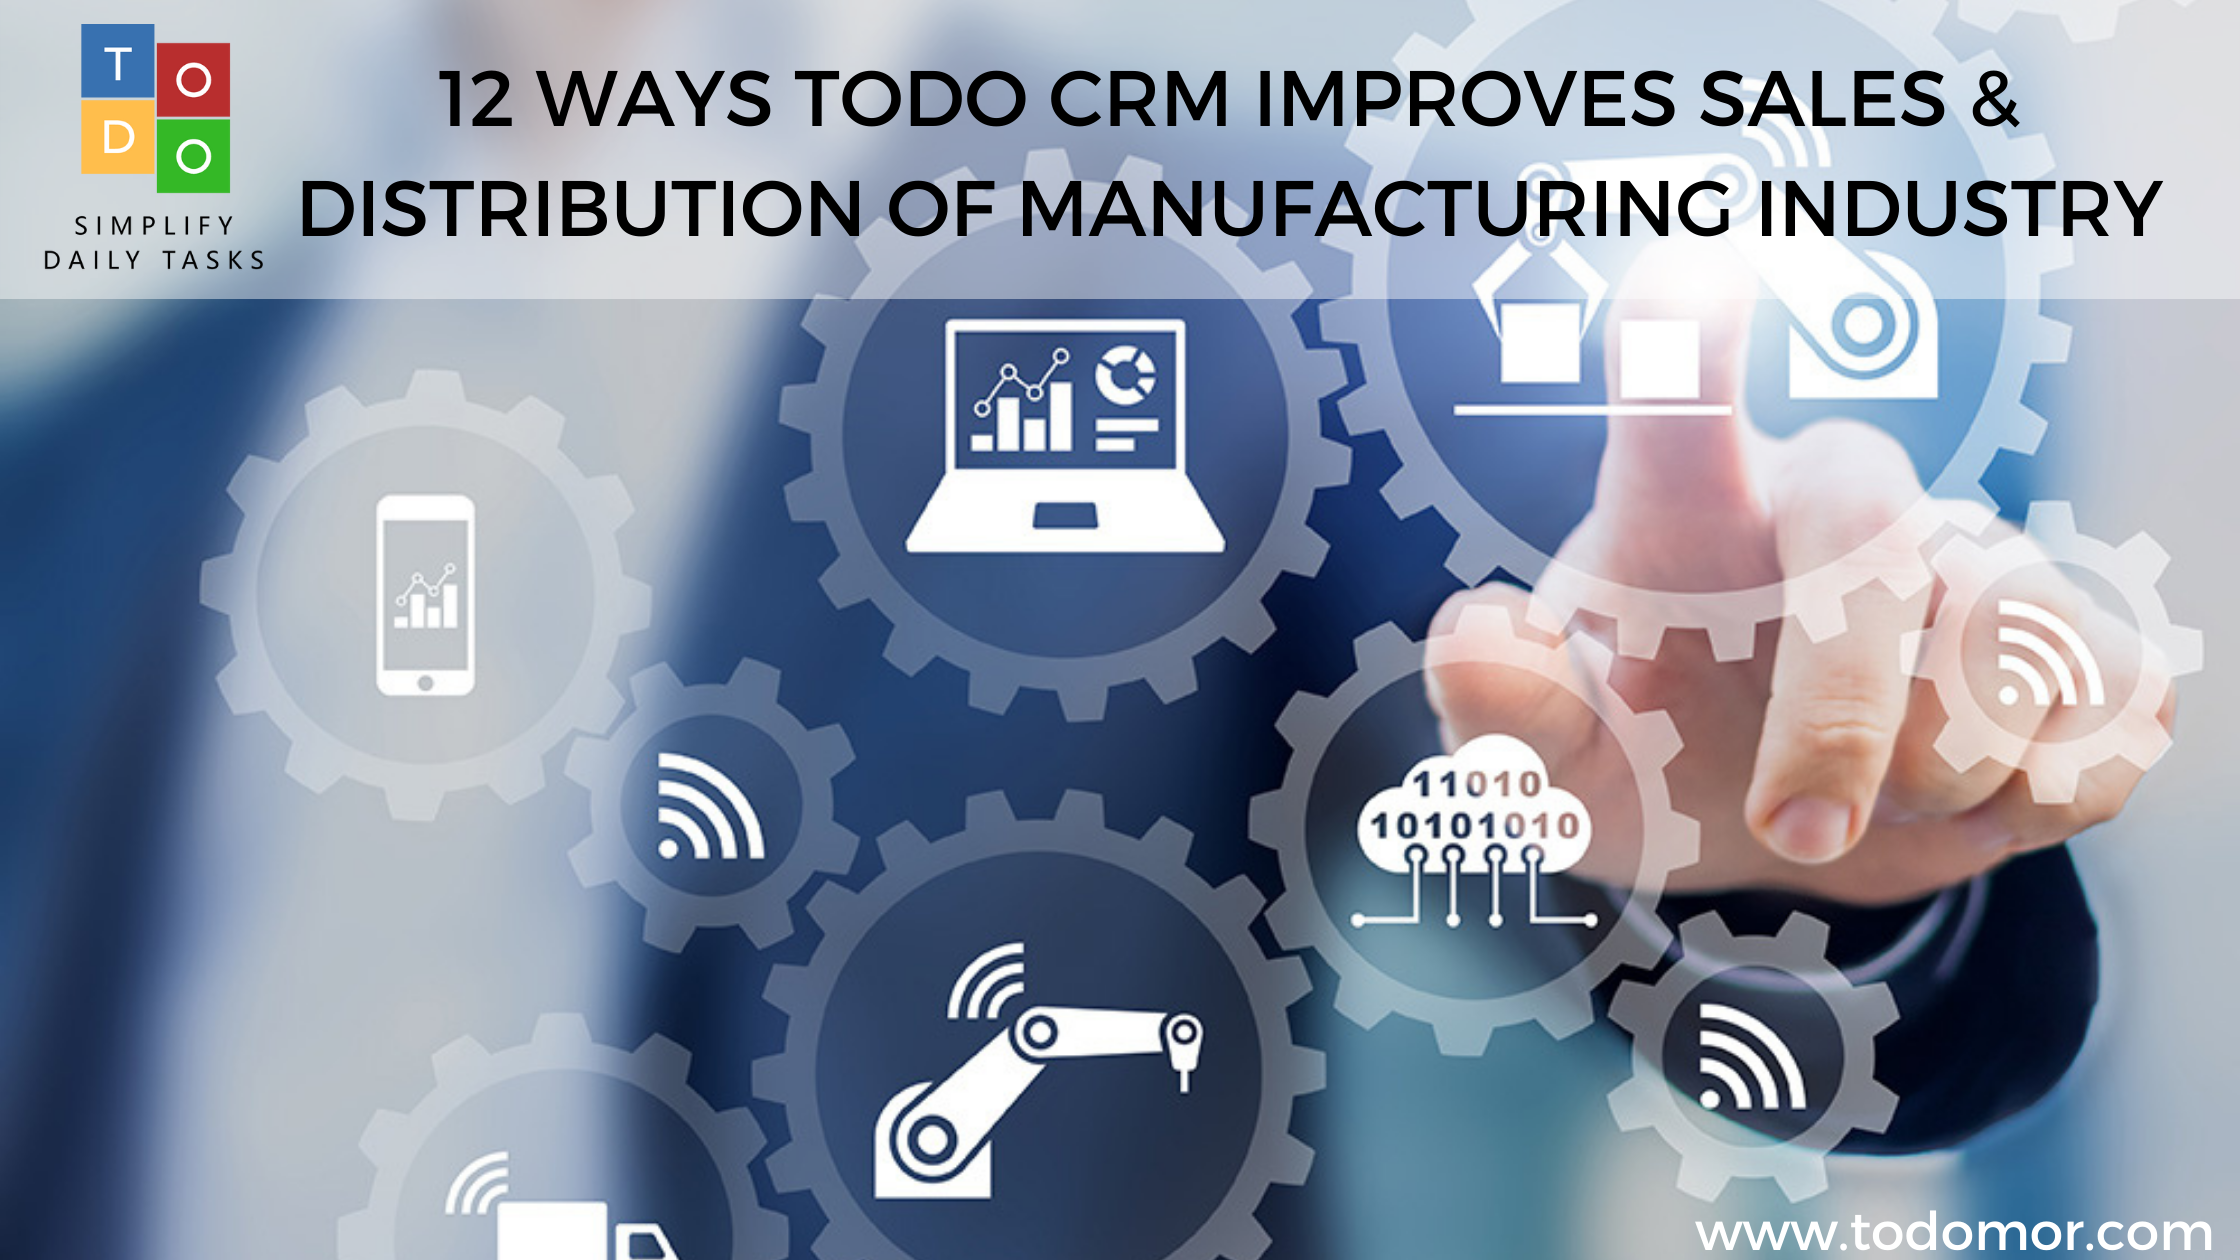 12 ways ToDo CRM improves Manufacturing Industry Sales & Distribution